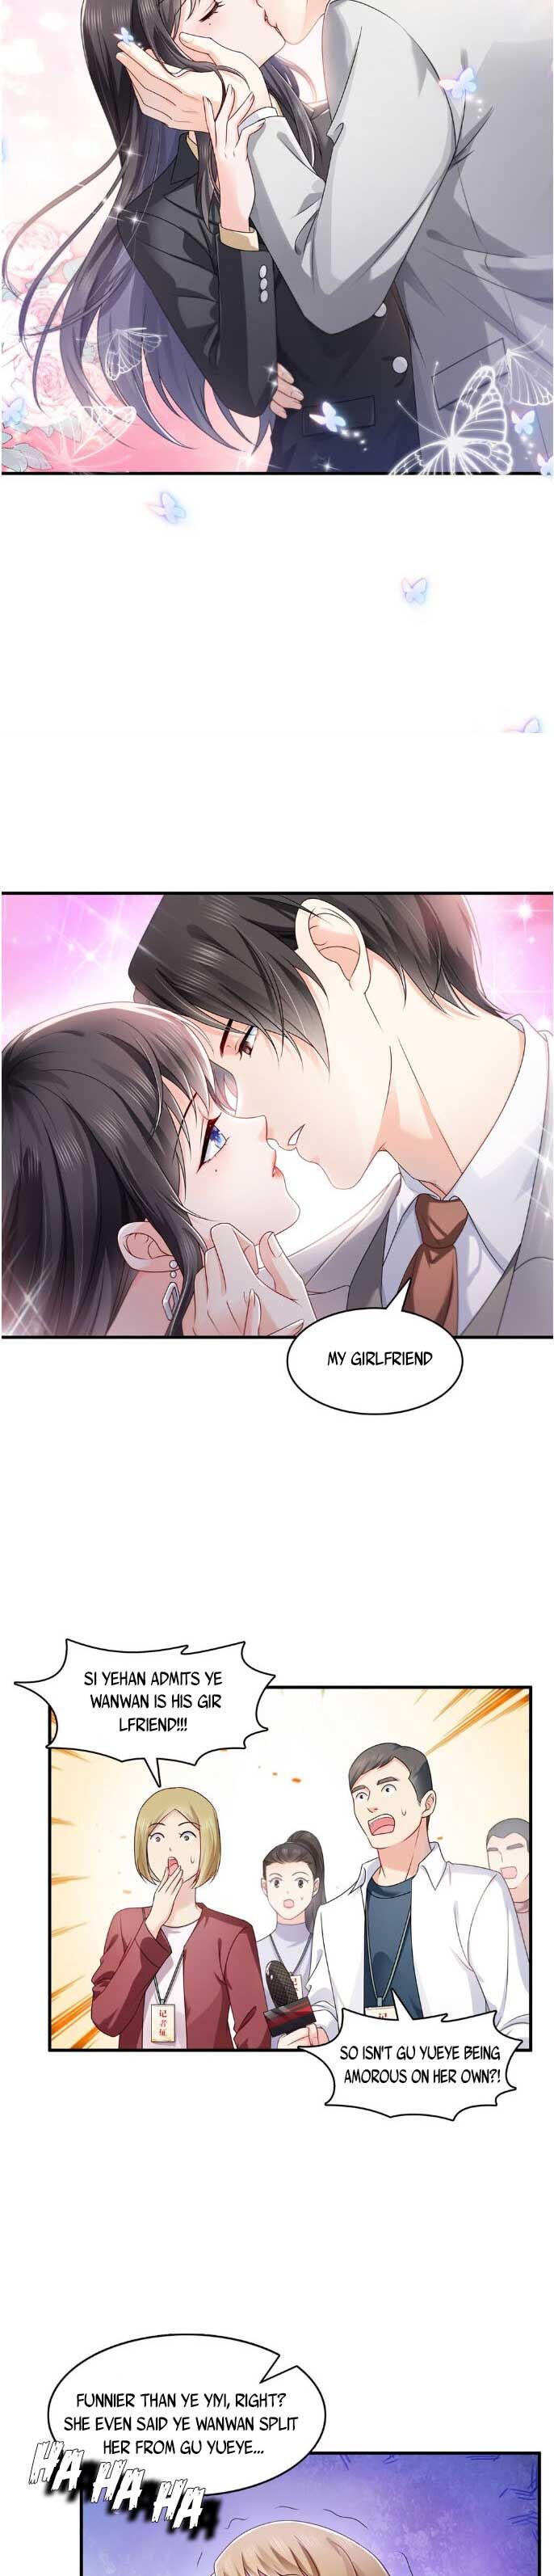 100% Sweet Love: The Delinquent XXX Wife Is a Bit Sweet (Novel) Ch.393